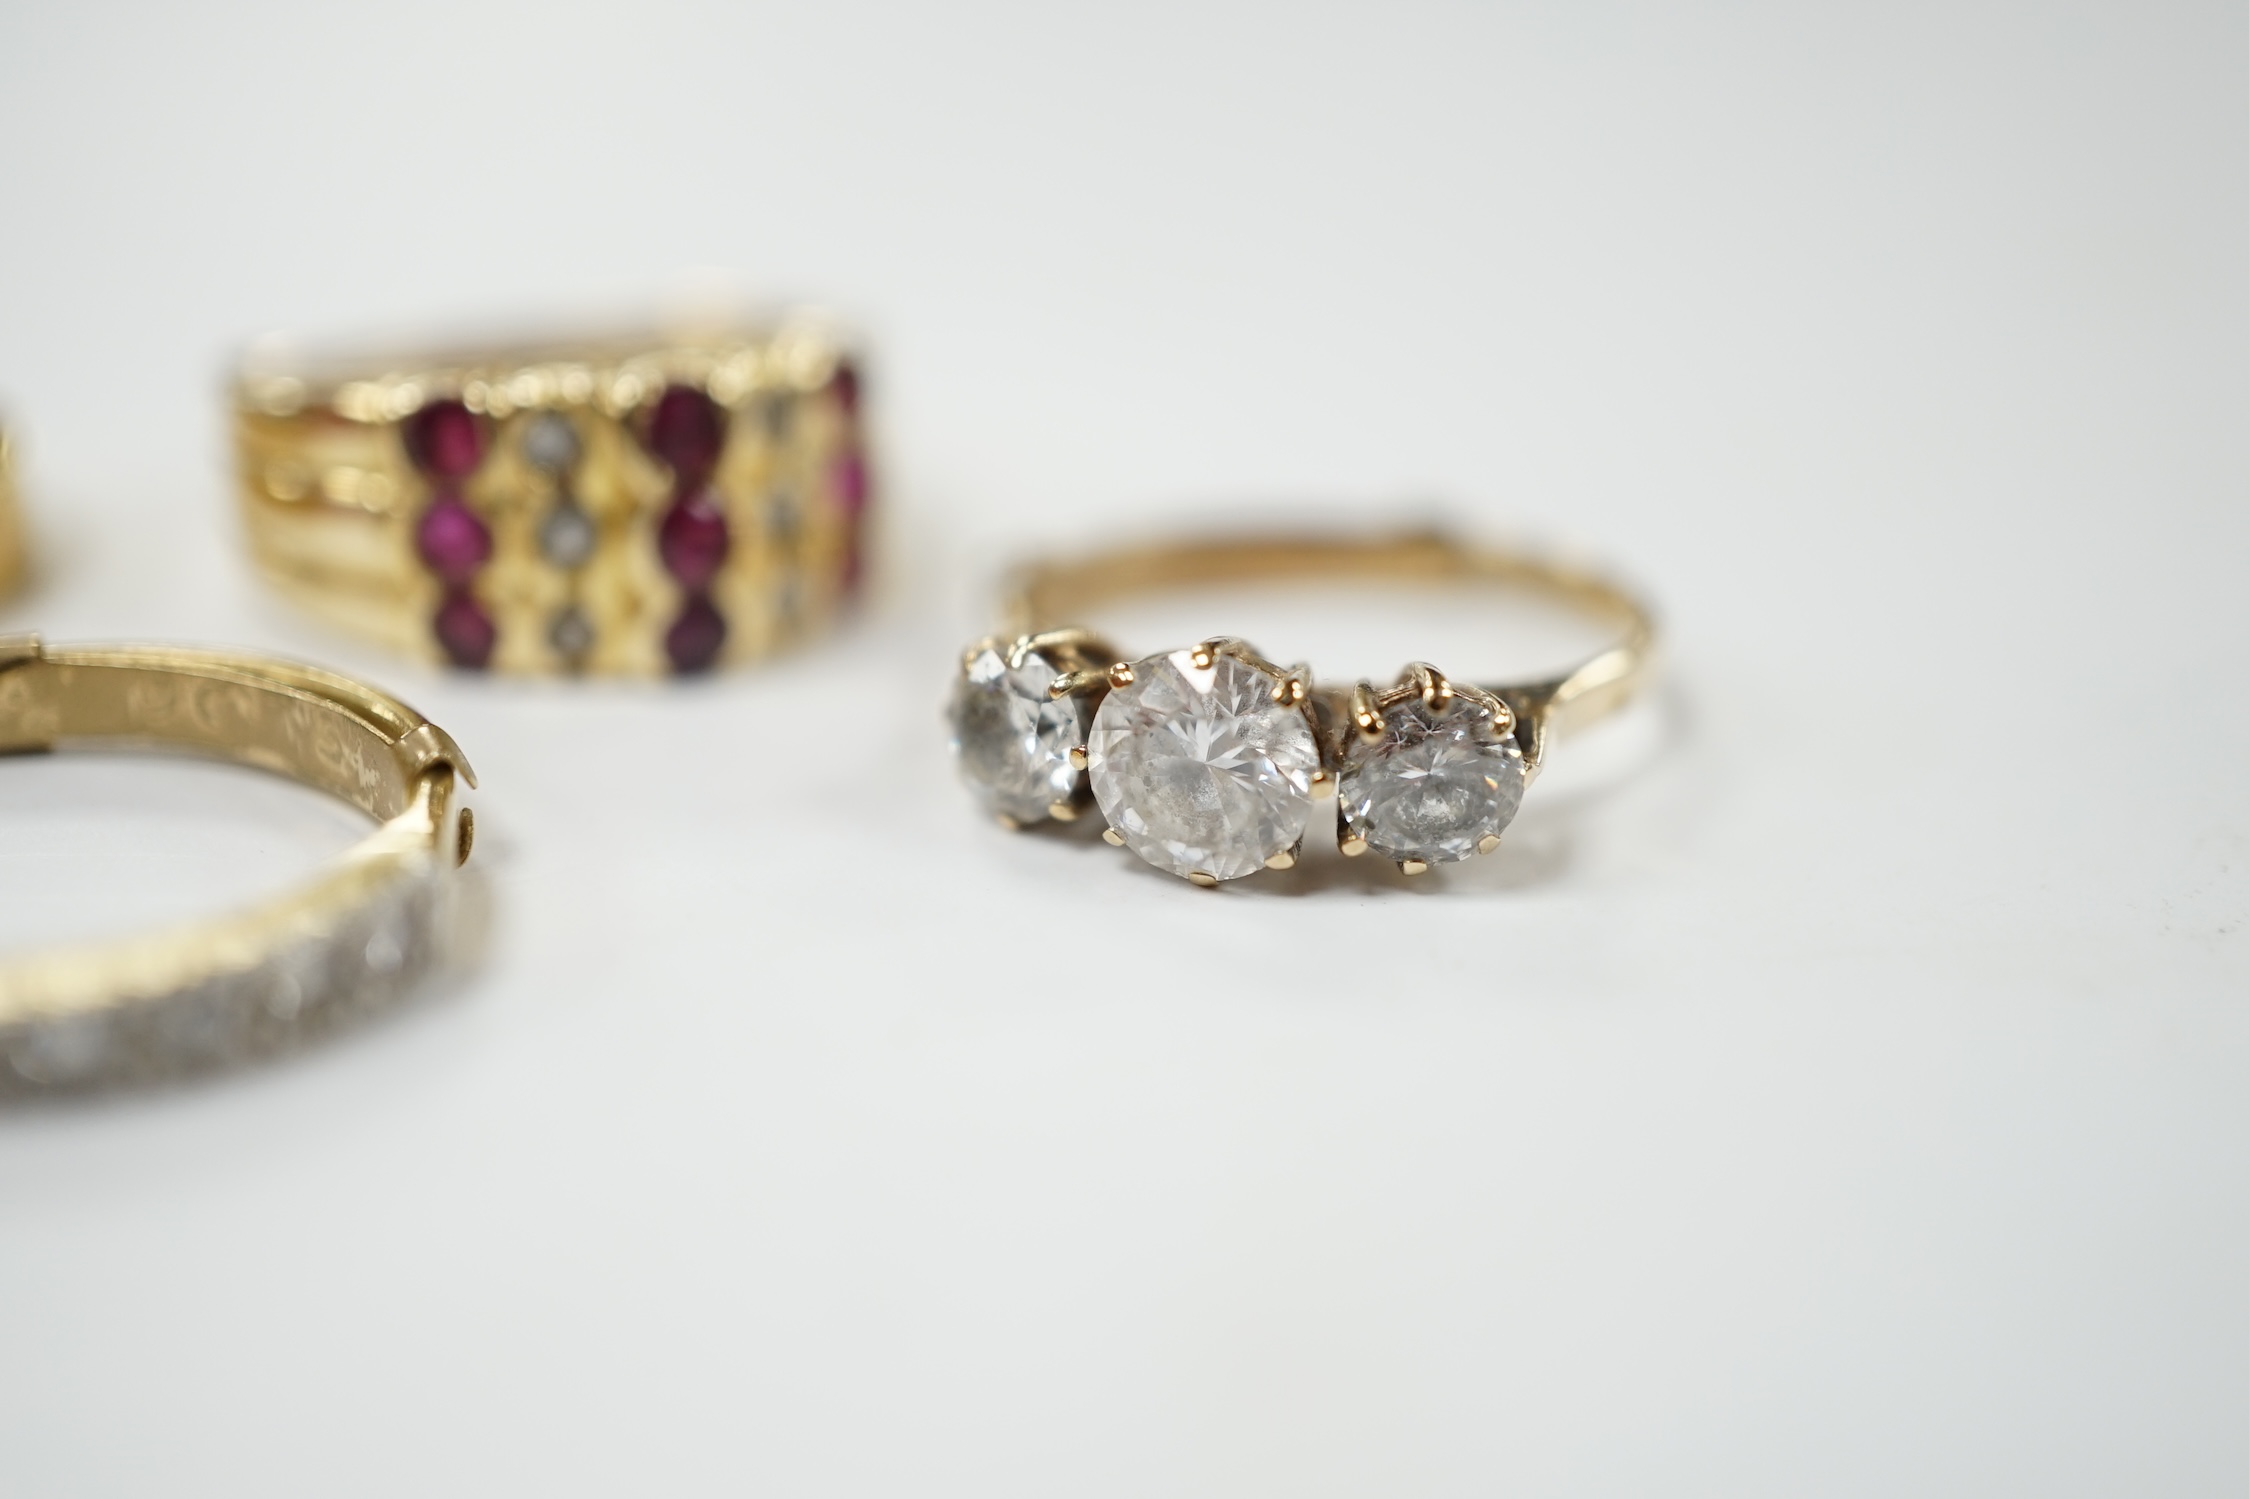 An 18ct and diamond chip set half hoop ring, size L/M, an 18ct gold band and two 9ct and gem set rings. Condition - fair